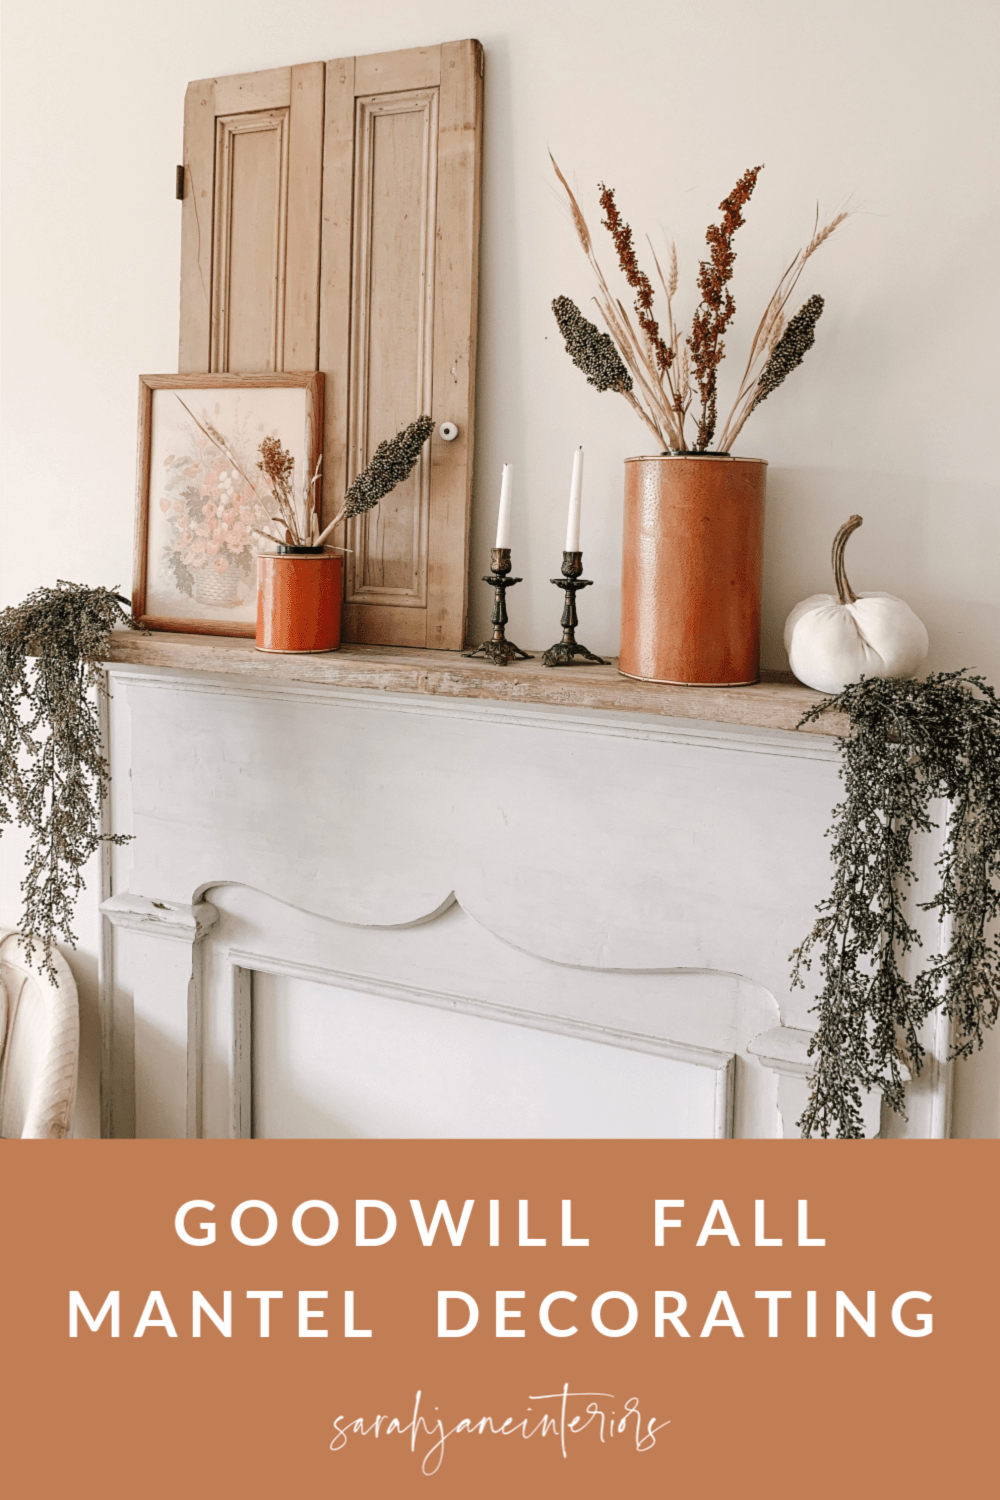 decorating for autumn on an old mantle